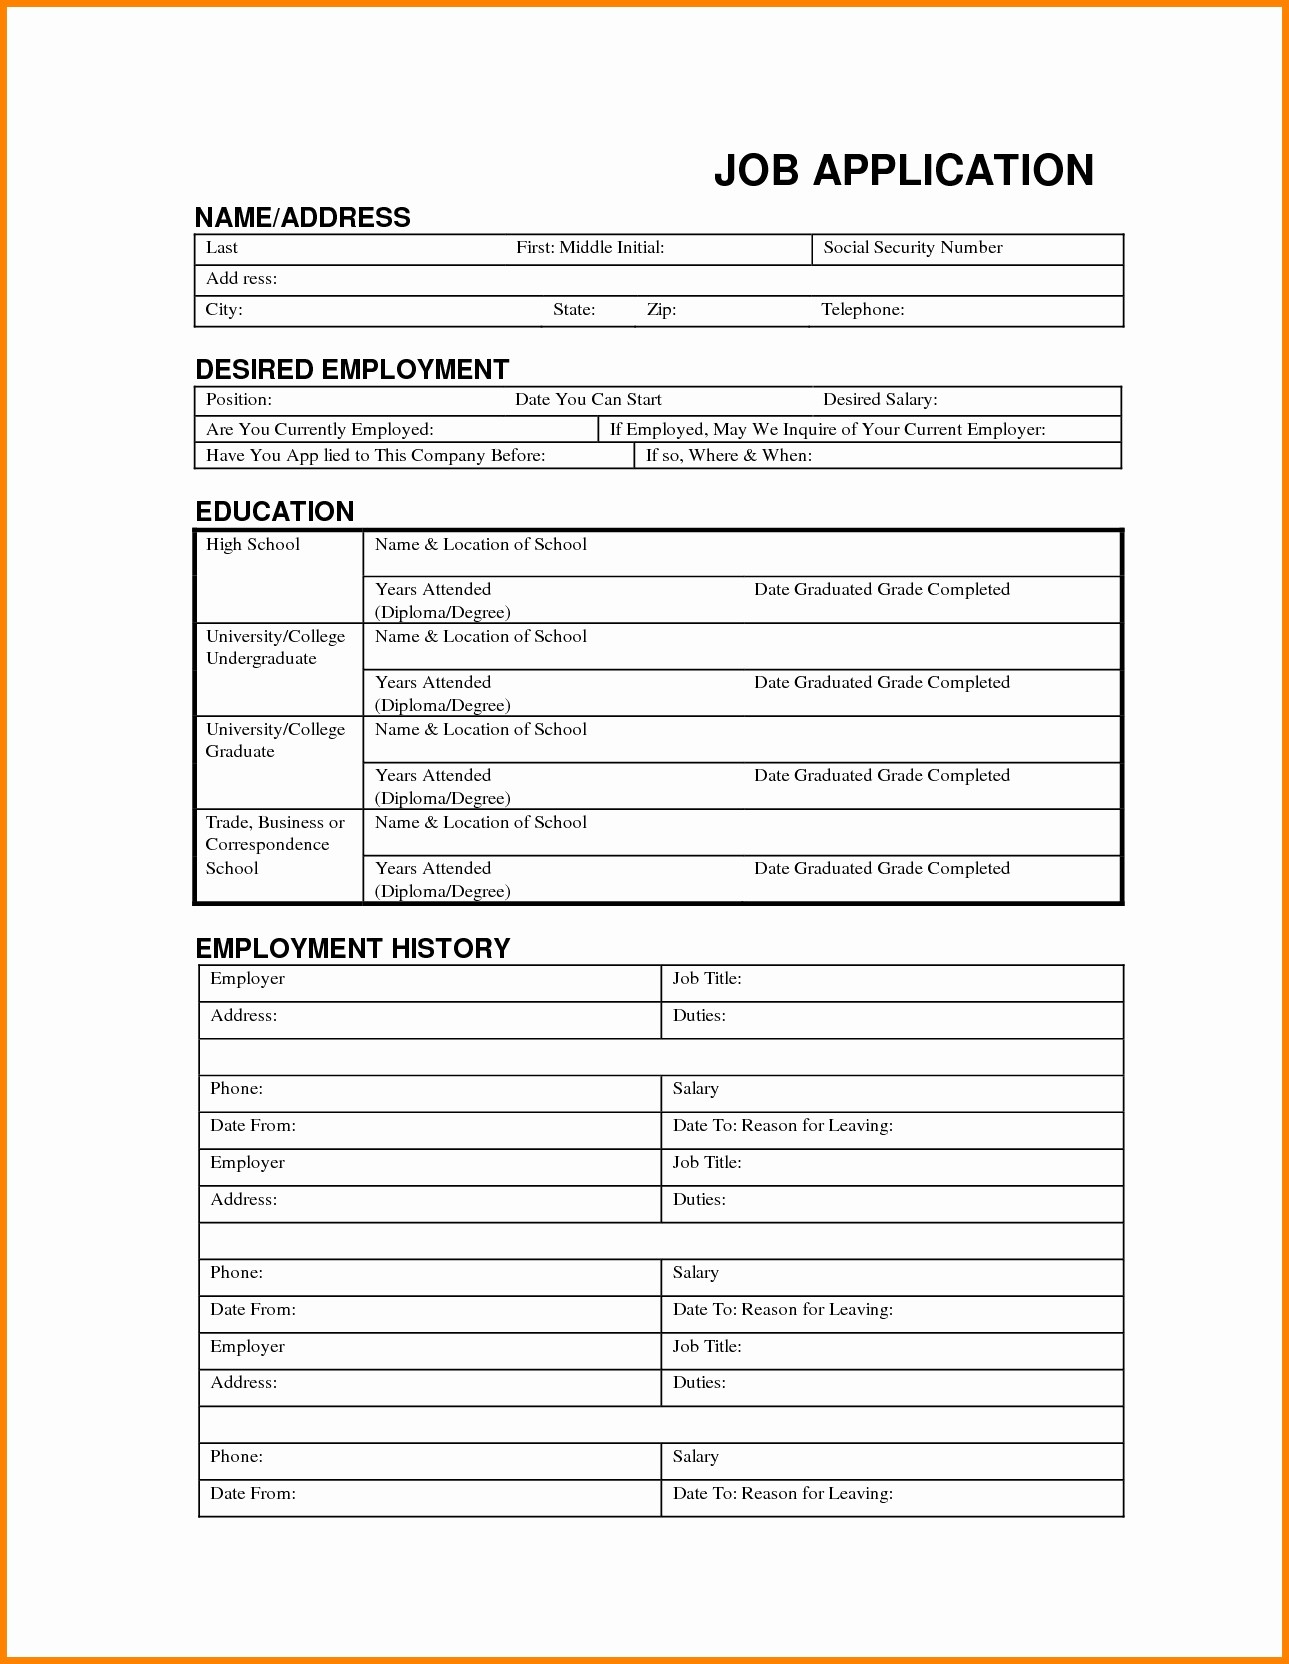 Free Employment Application form Template Lovely Free Employment Job Application form Template Sample